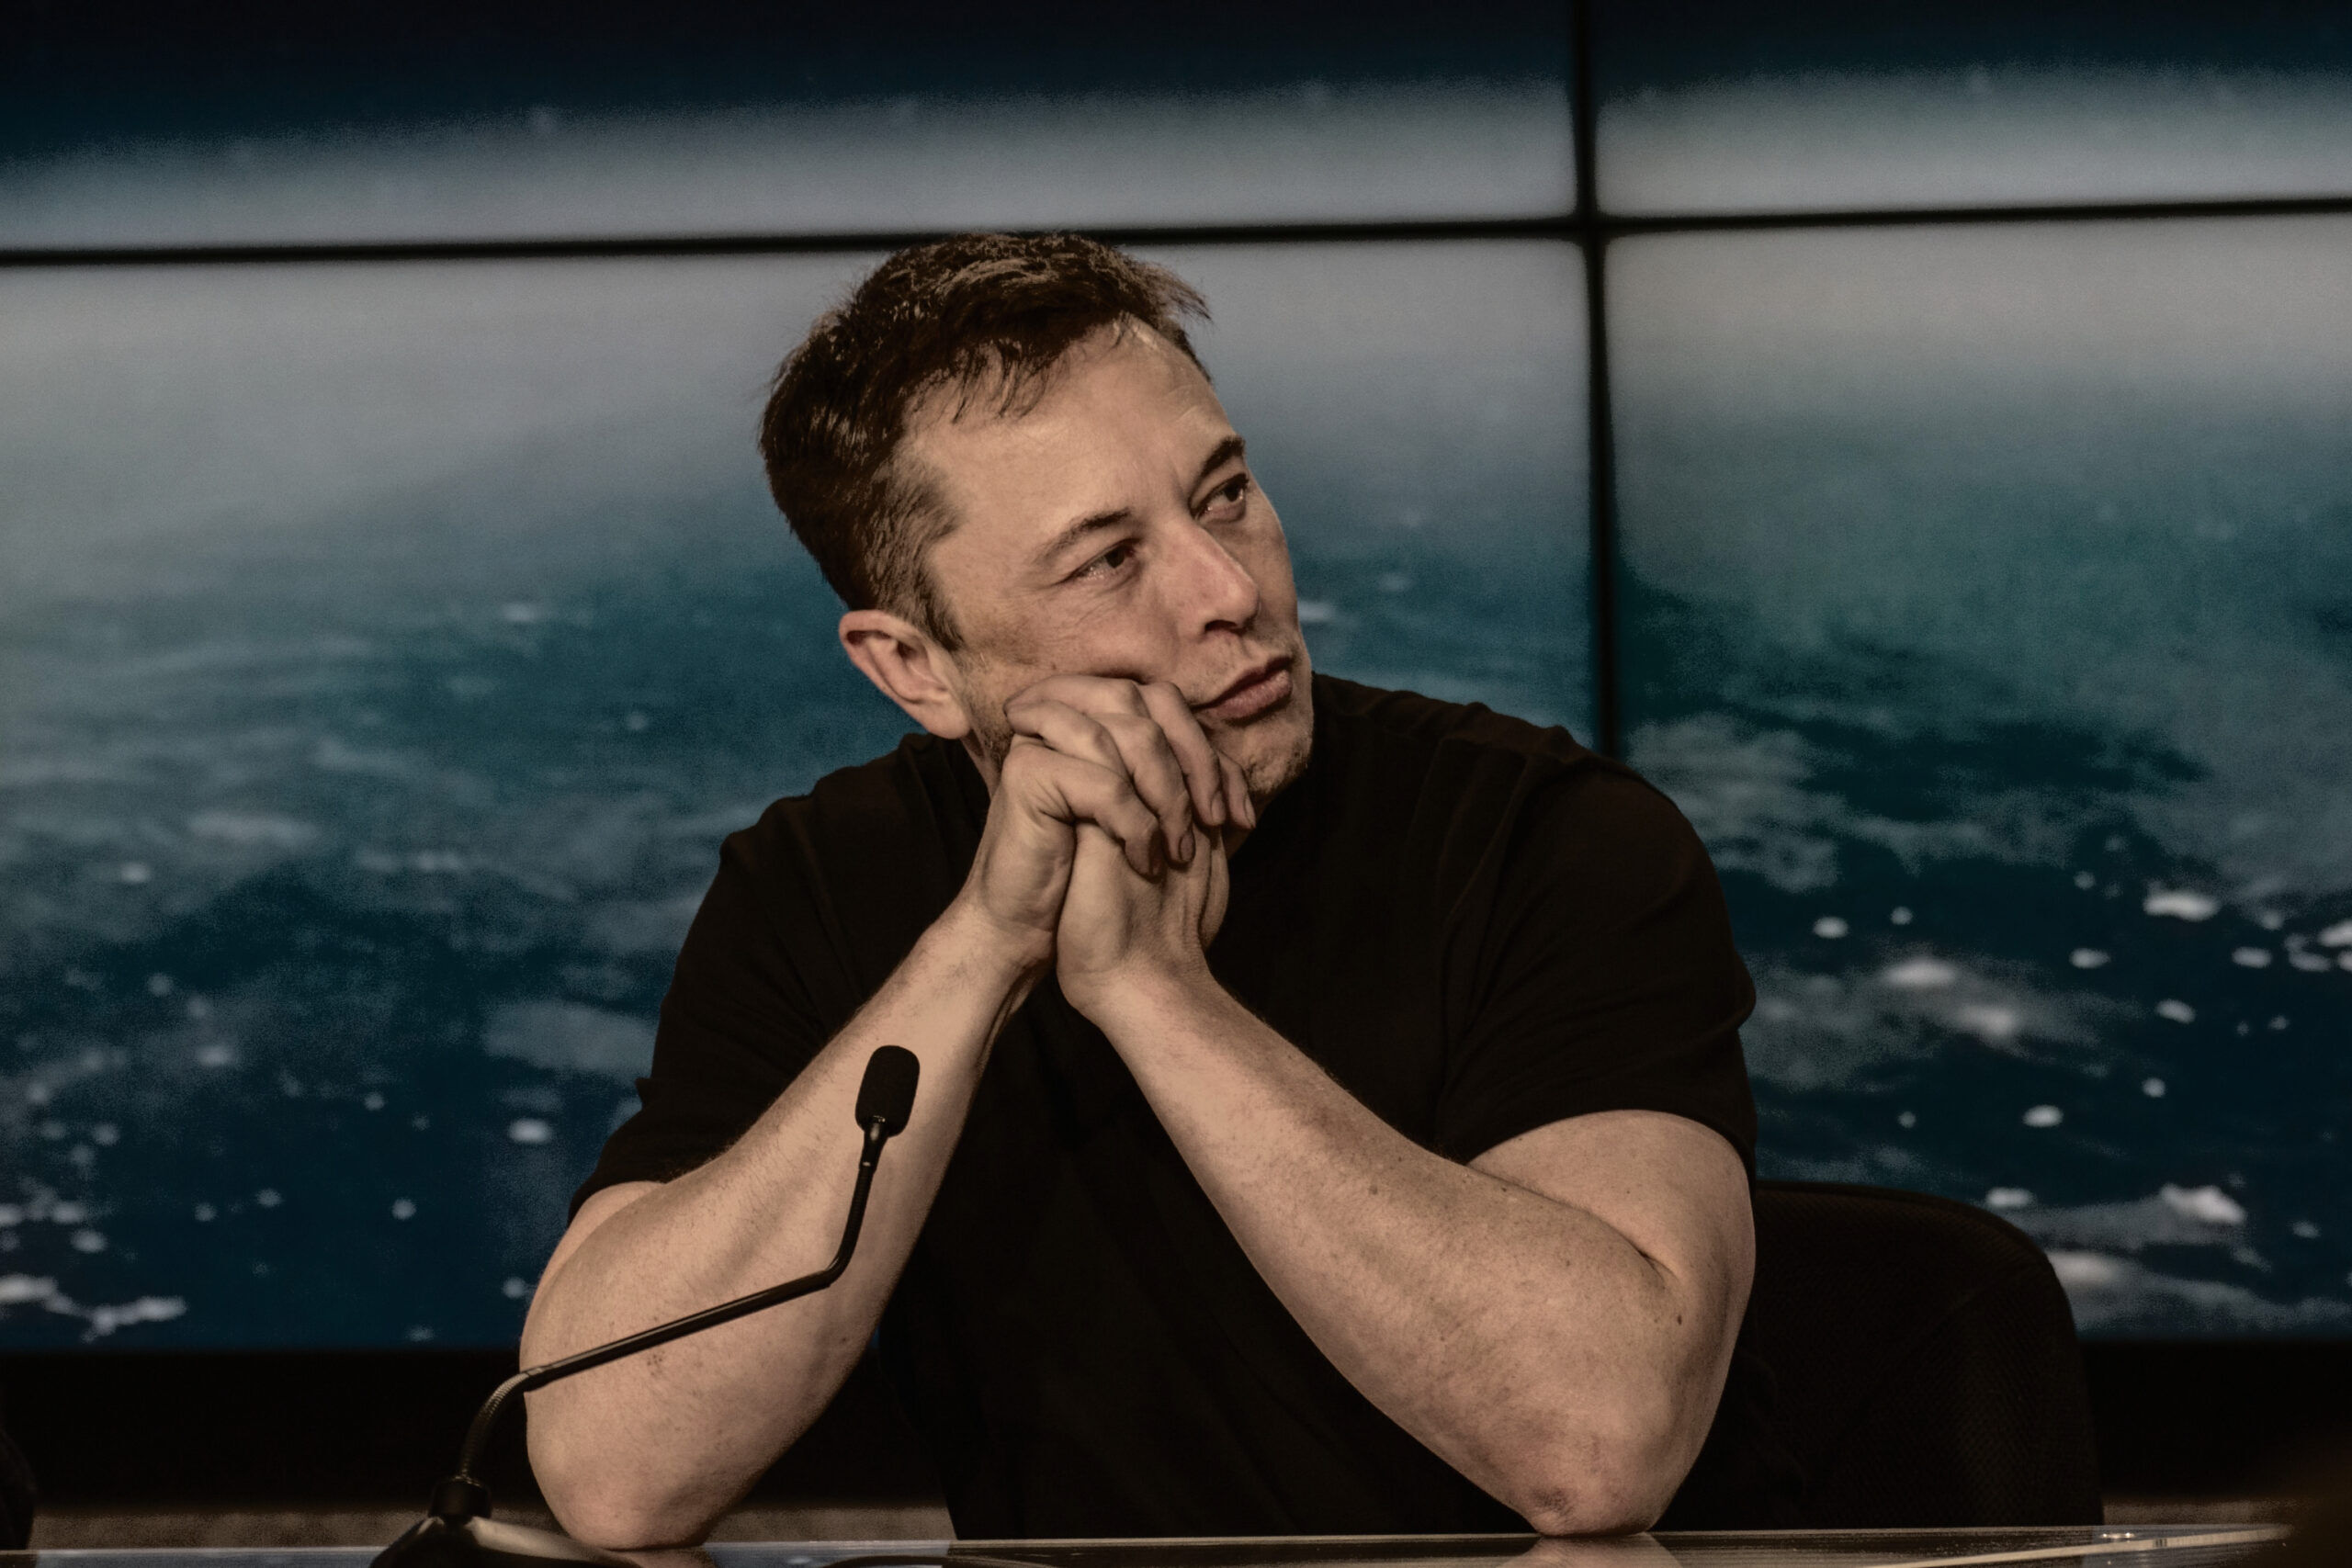 SpaceX and Tesla CEO Elon Musk at the SpaceX Falcon Heavy Flight 1 post launch press conference on February 6, 2018